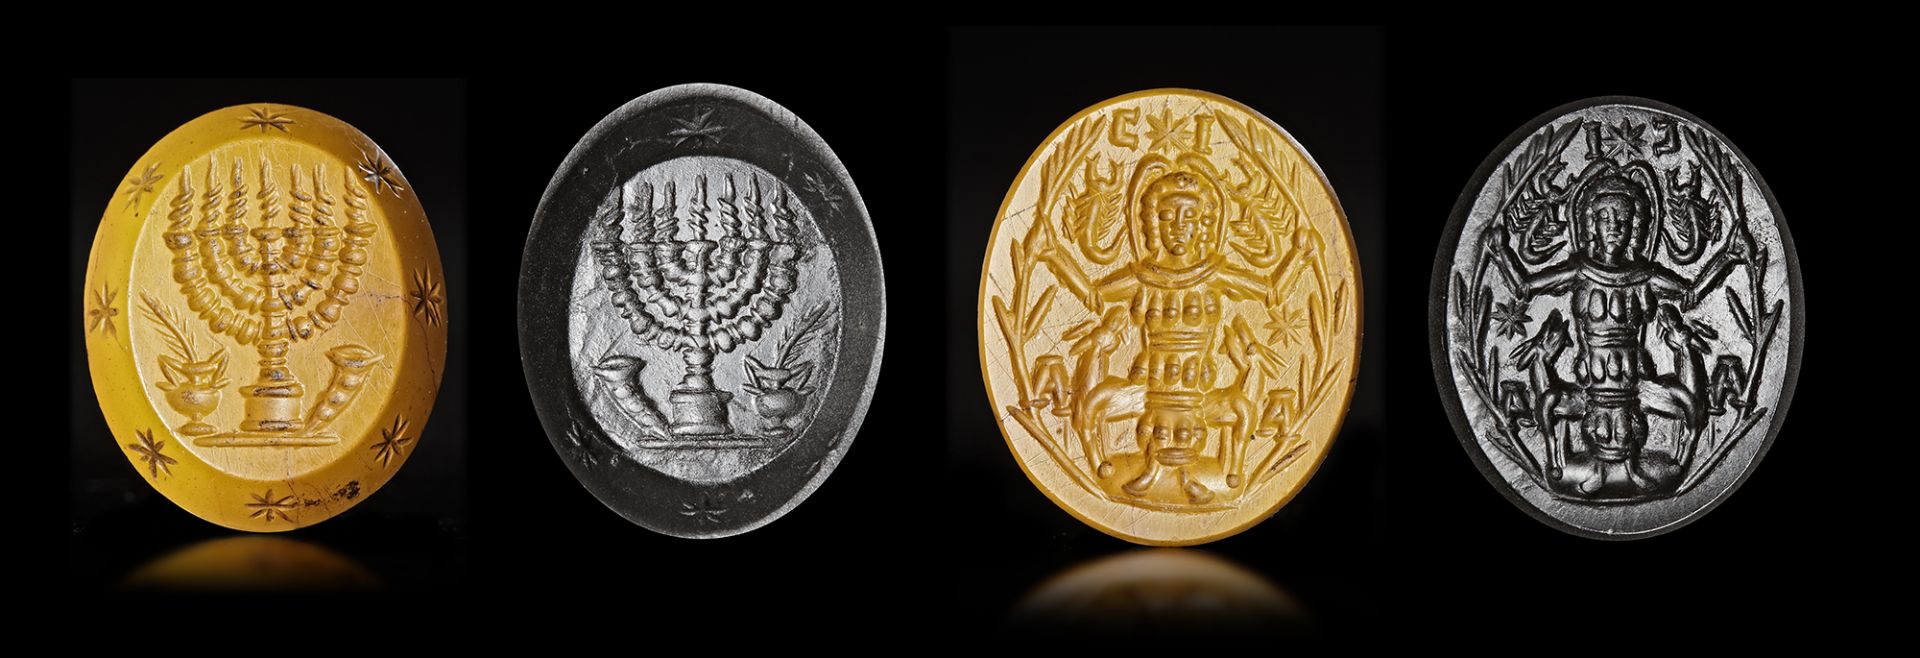 A YELLOW JASPER INTAGLIO WITH A CULT DEITY AND MENORAH ON REVERSE, 3RD CENTURY OR LATER